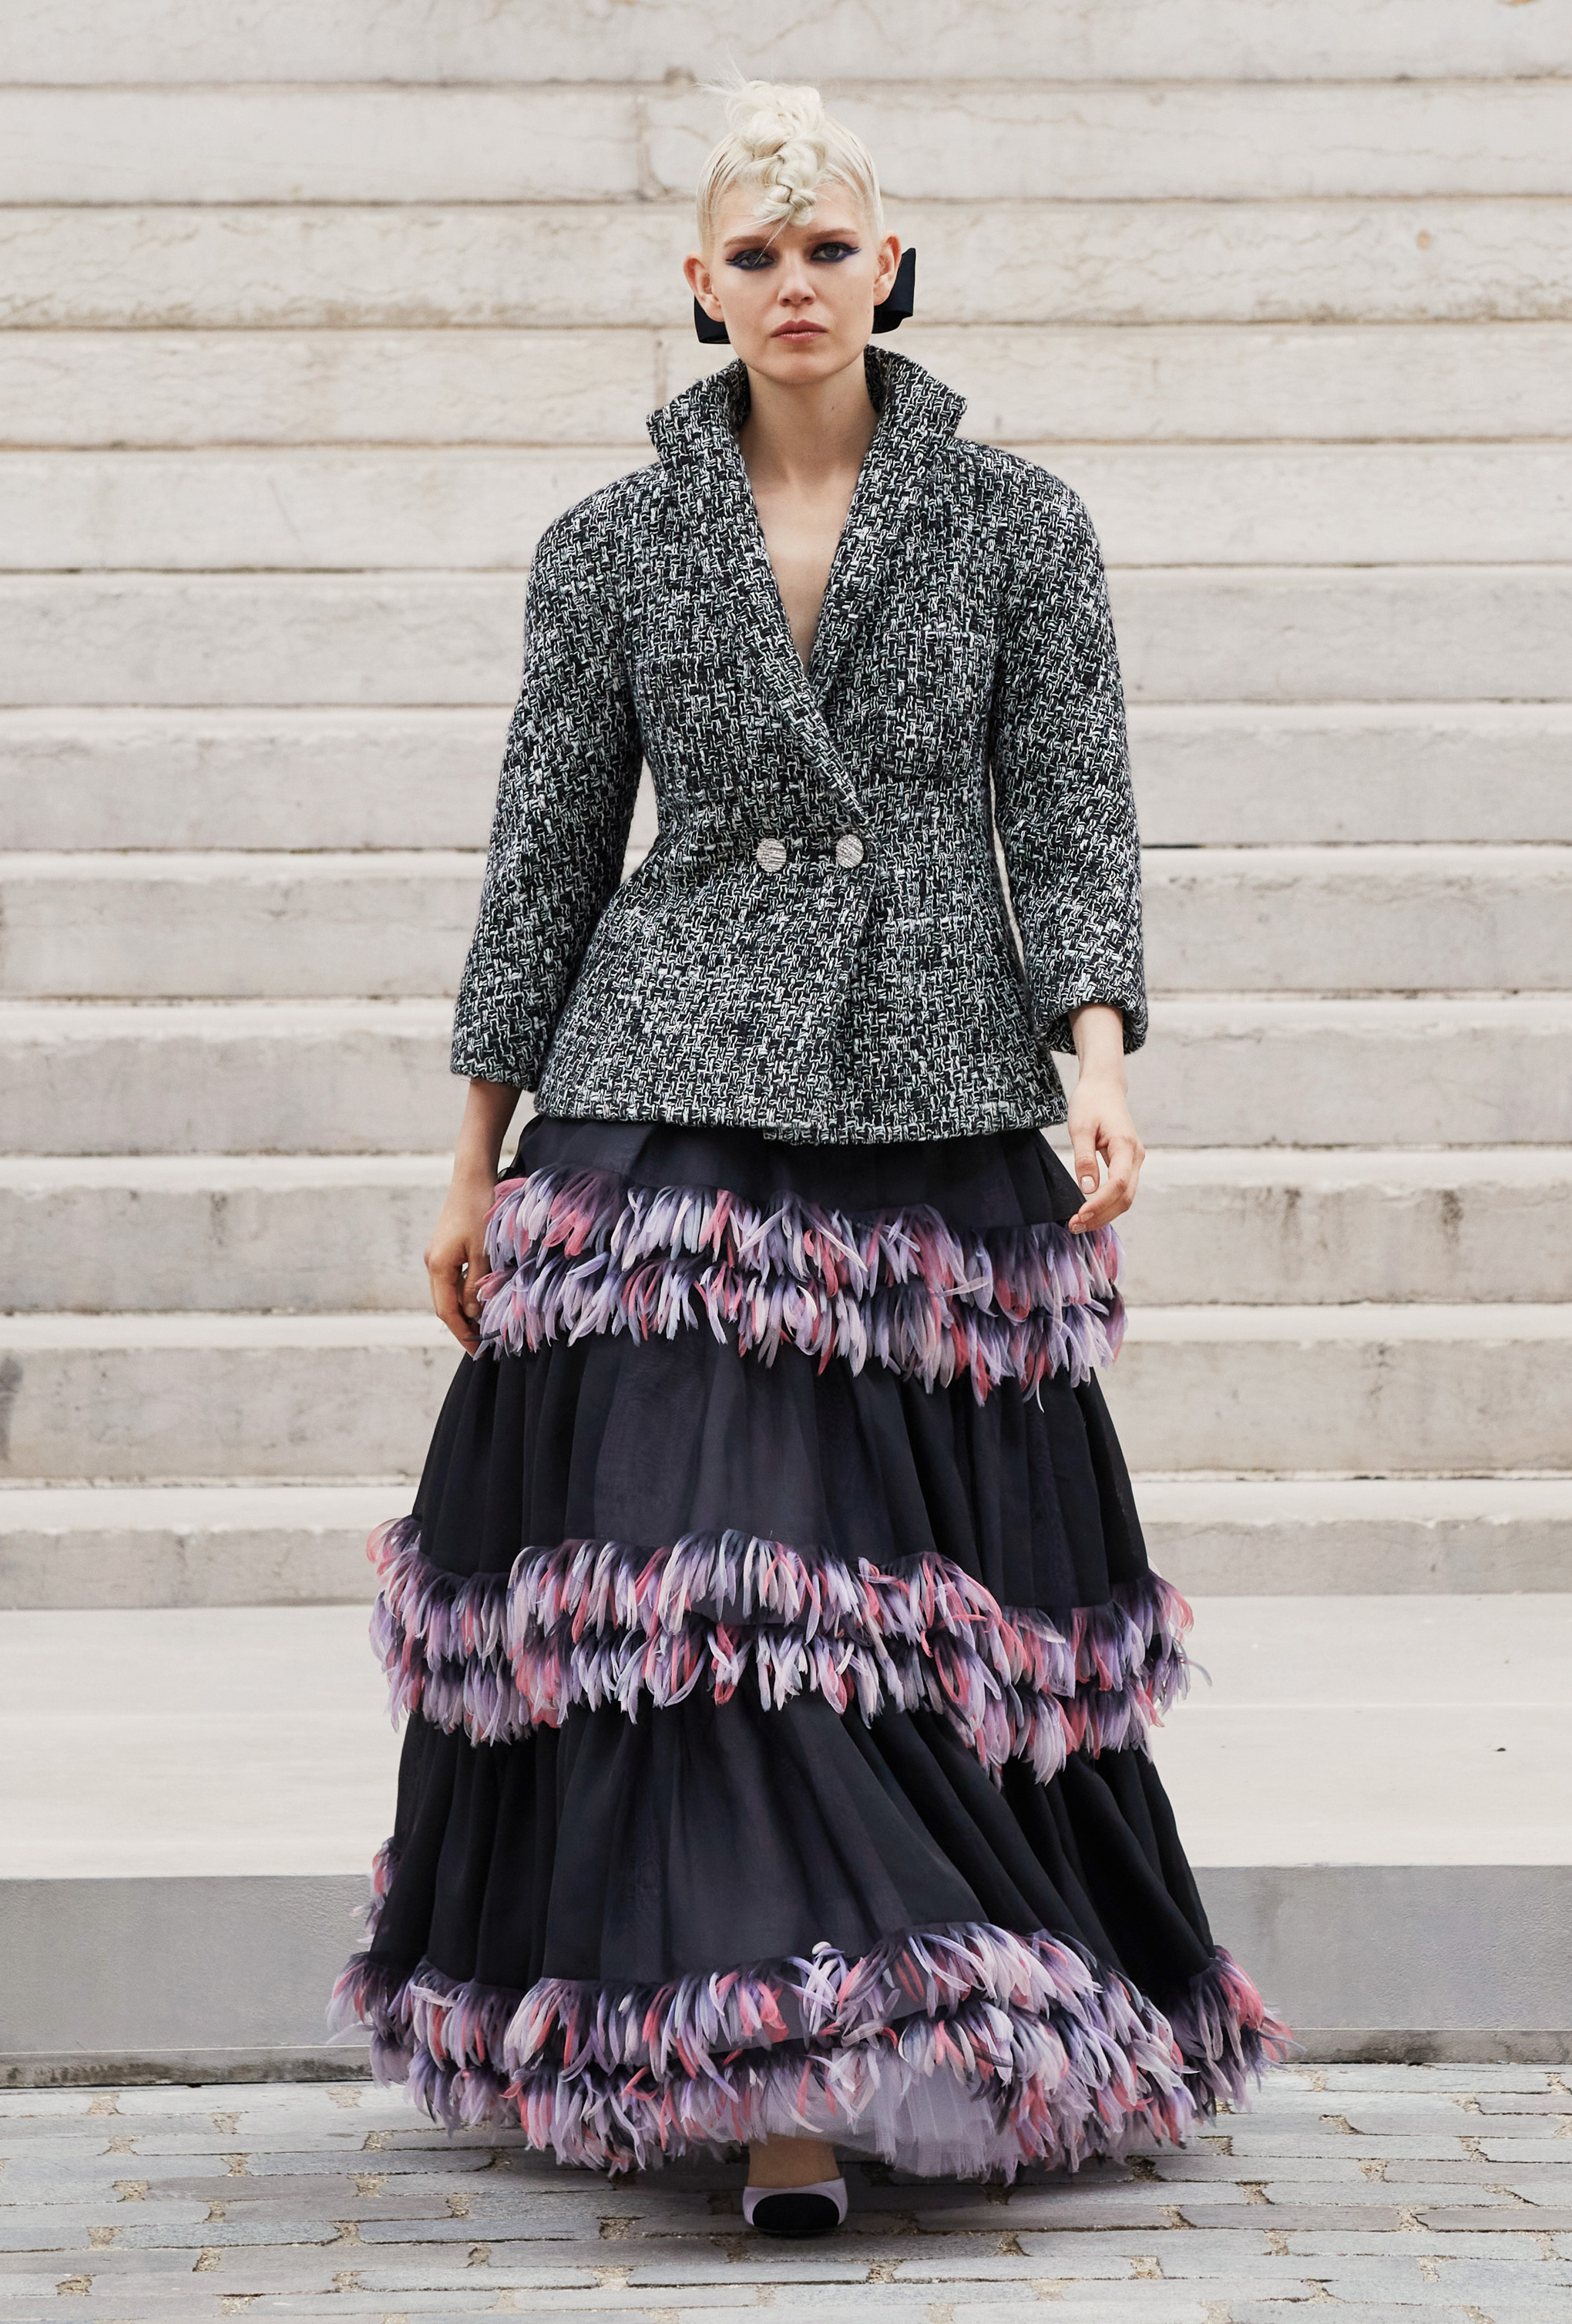 A model wearing a full look from Chanel's AW21 collection 